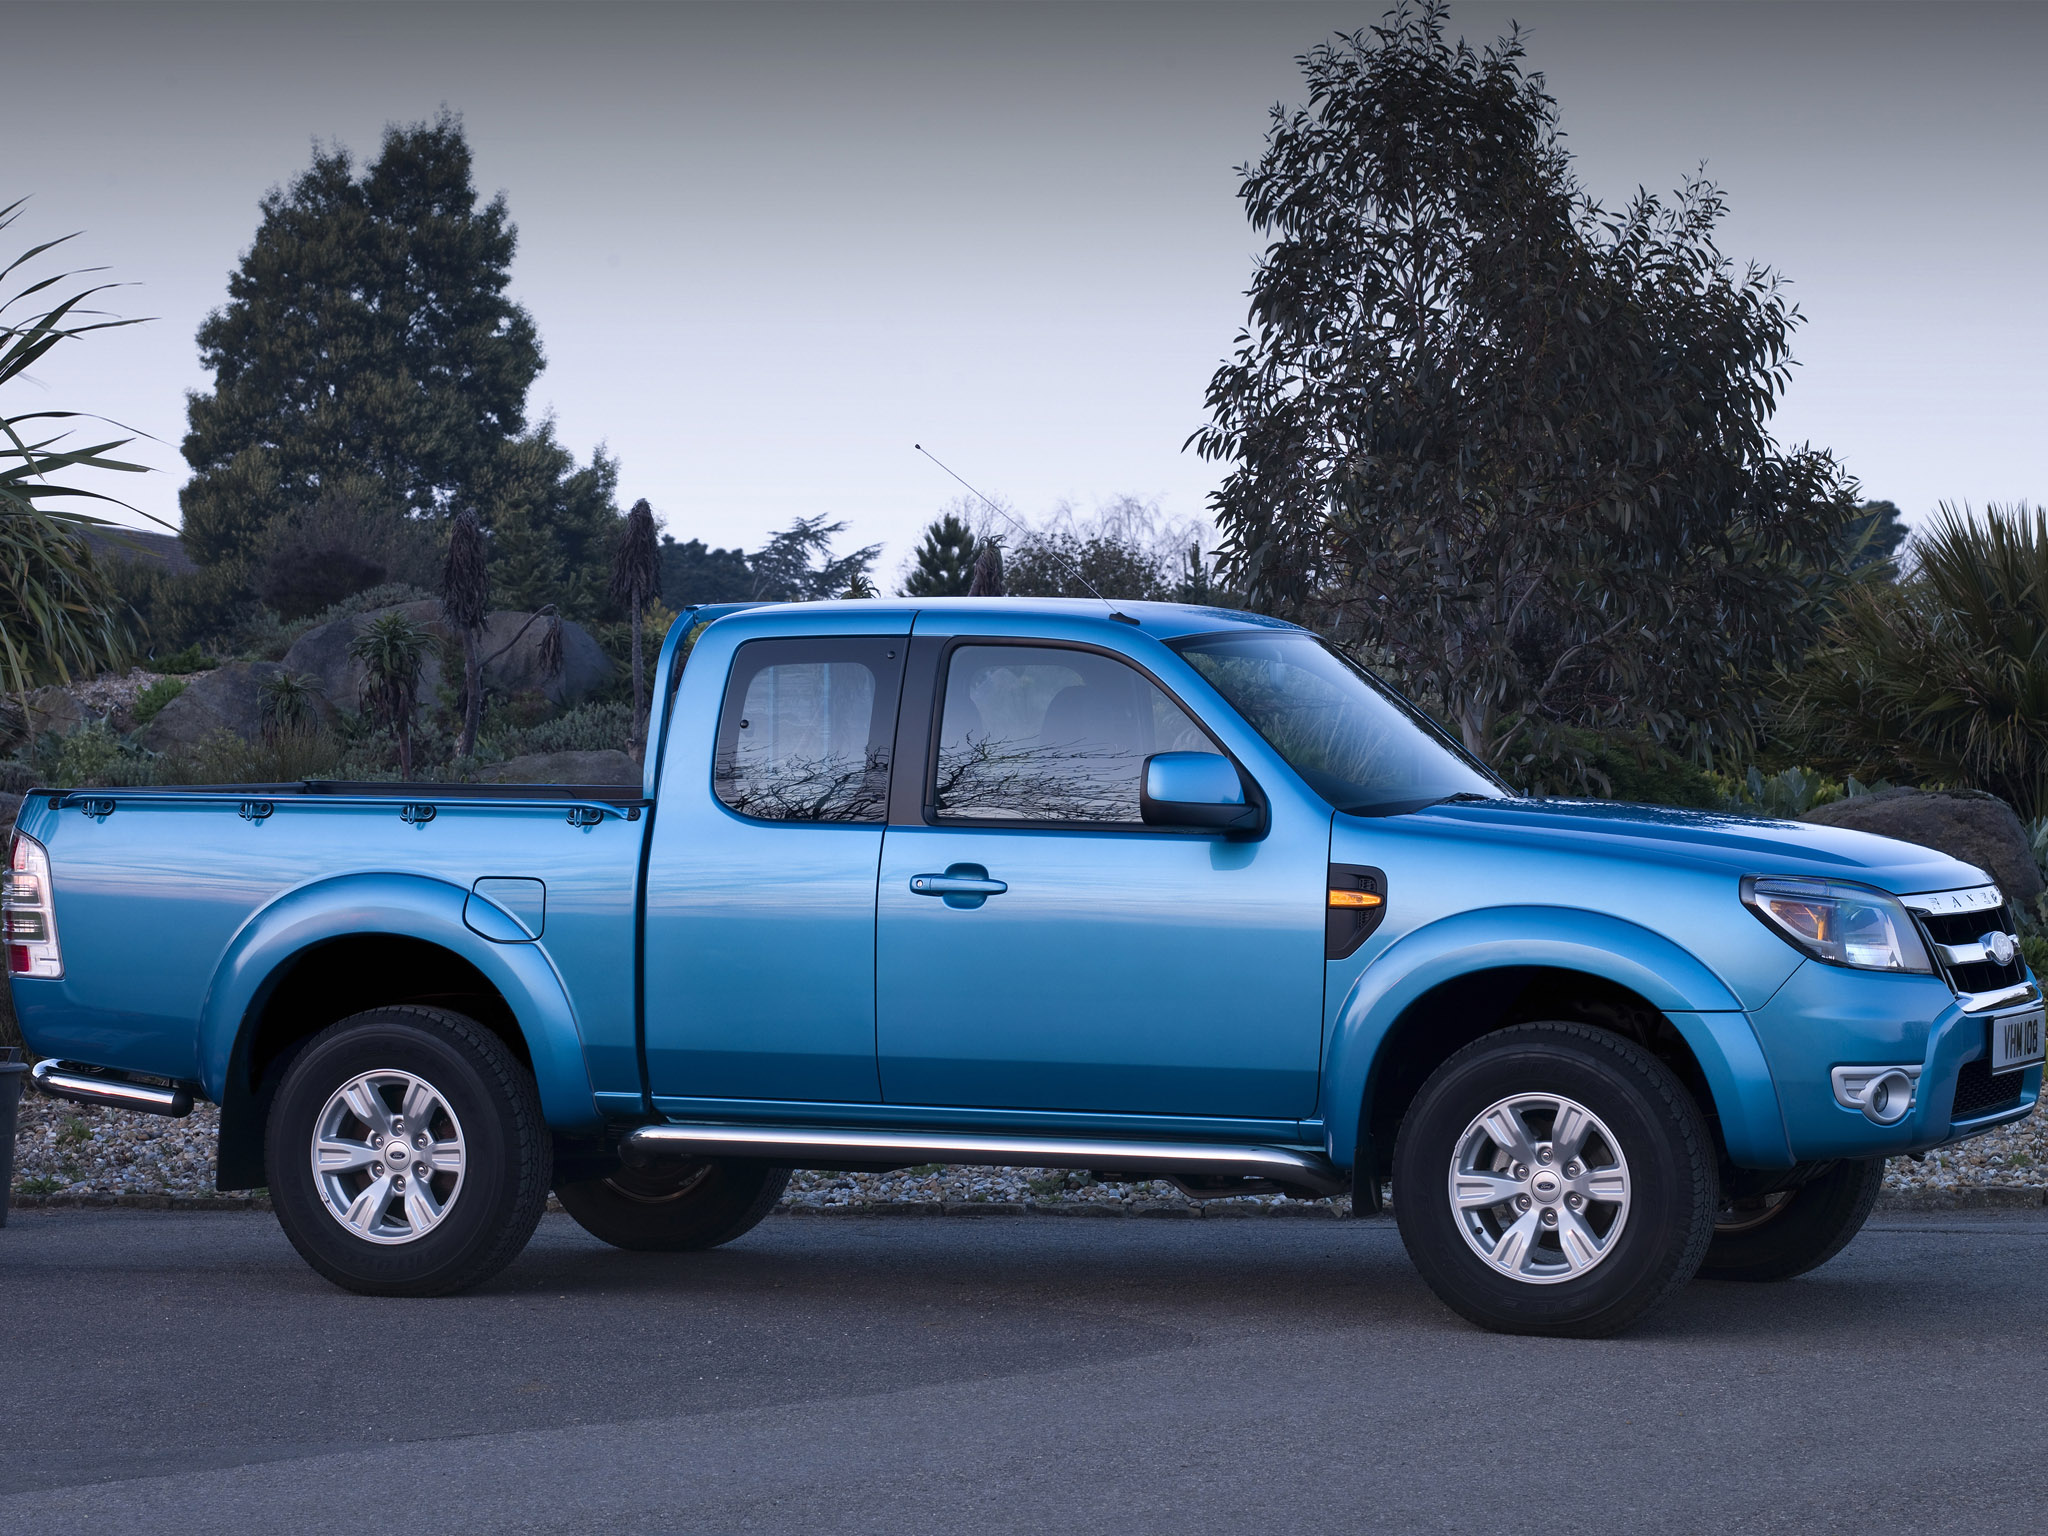 Car in pictures – car photo gallery » Ford Ranger Extended Cab UK 2009